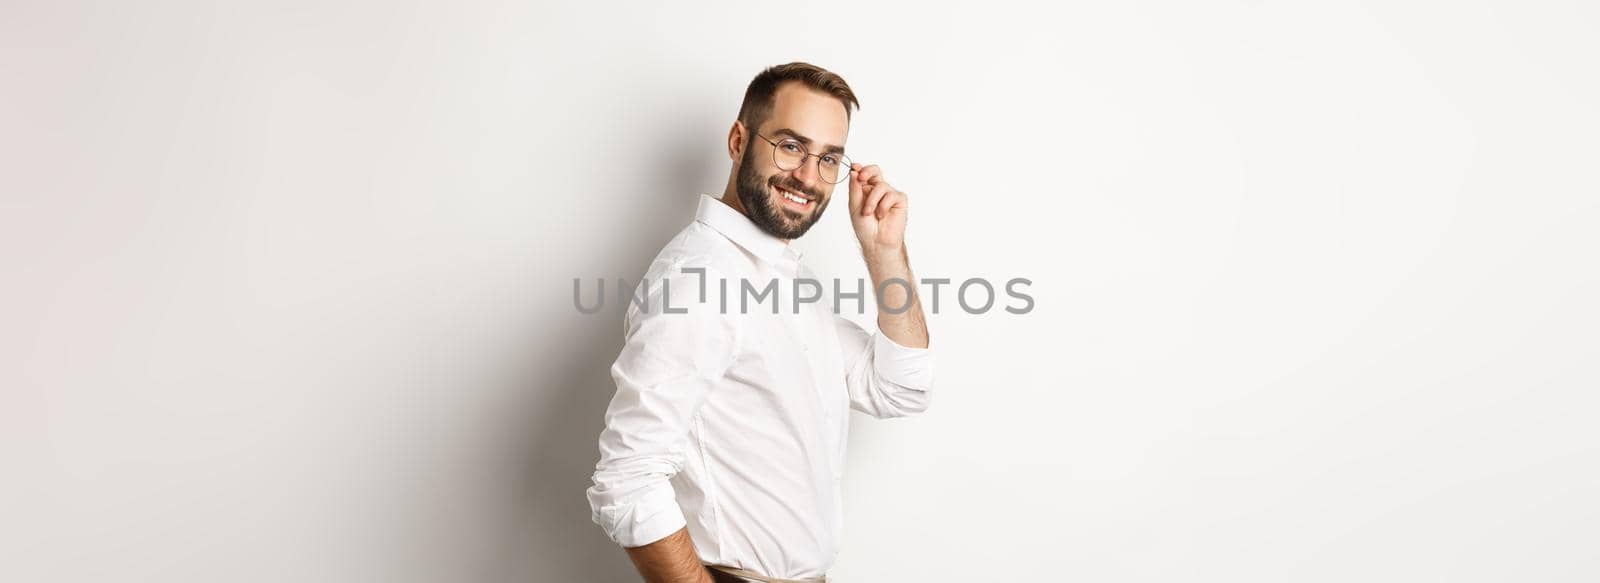 Handsome businessman turn at camera and looking confident, smiling cheeky, standing over white background.